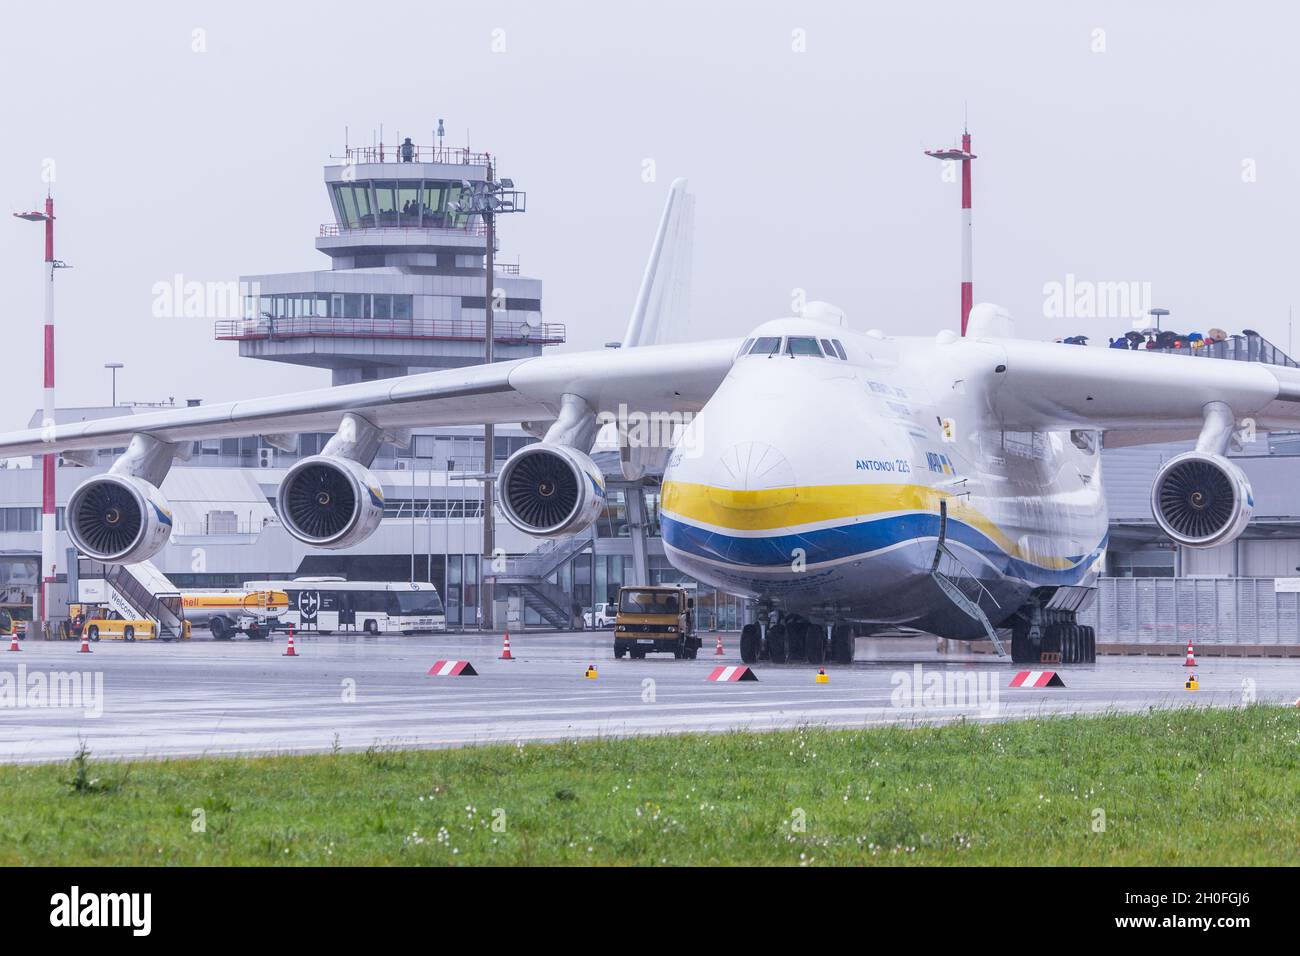 LINZ, AUSTRIA - Oct 07, 2021: Antonov AN225, the largest commercial transport aircraft of the world at Linz Airport in Austria Stock Photo